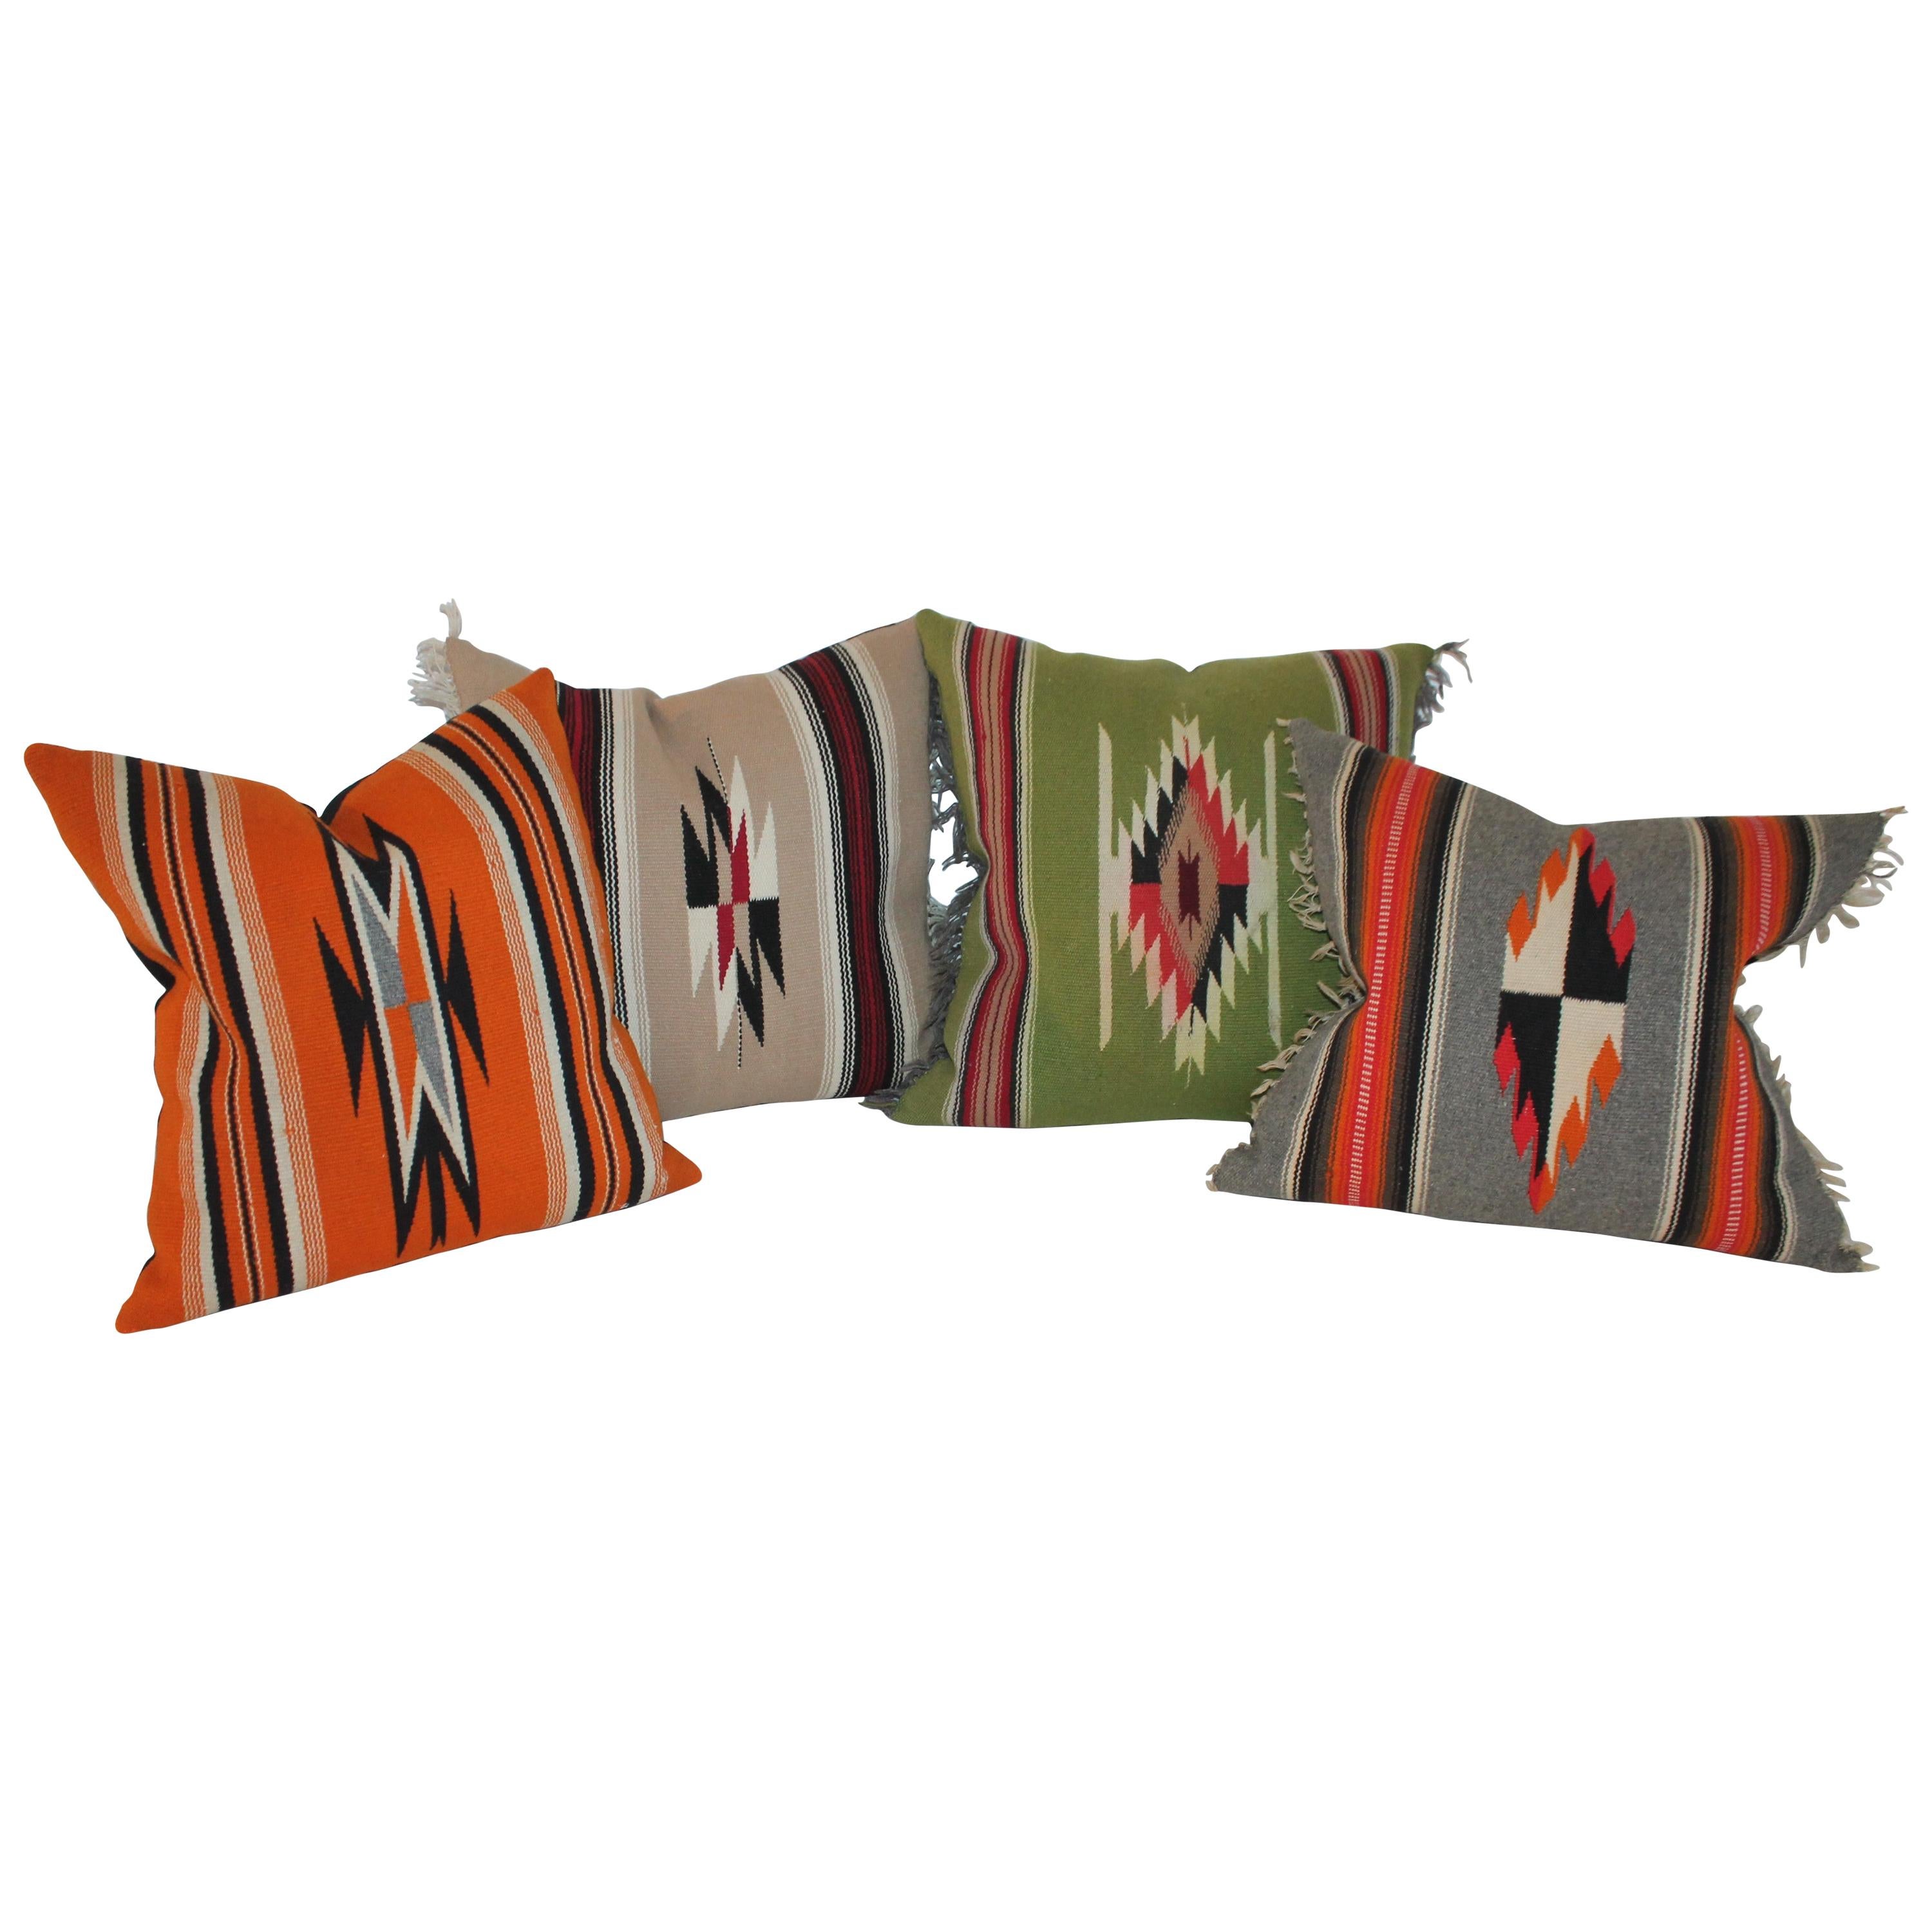 Collection of Four Mexican/ American Indian Weaving Serape Pillows